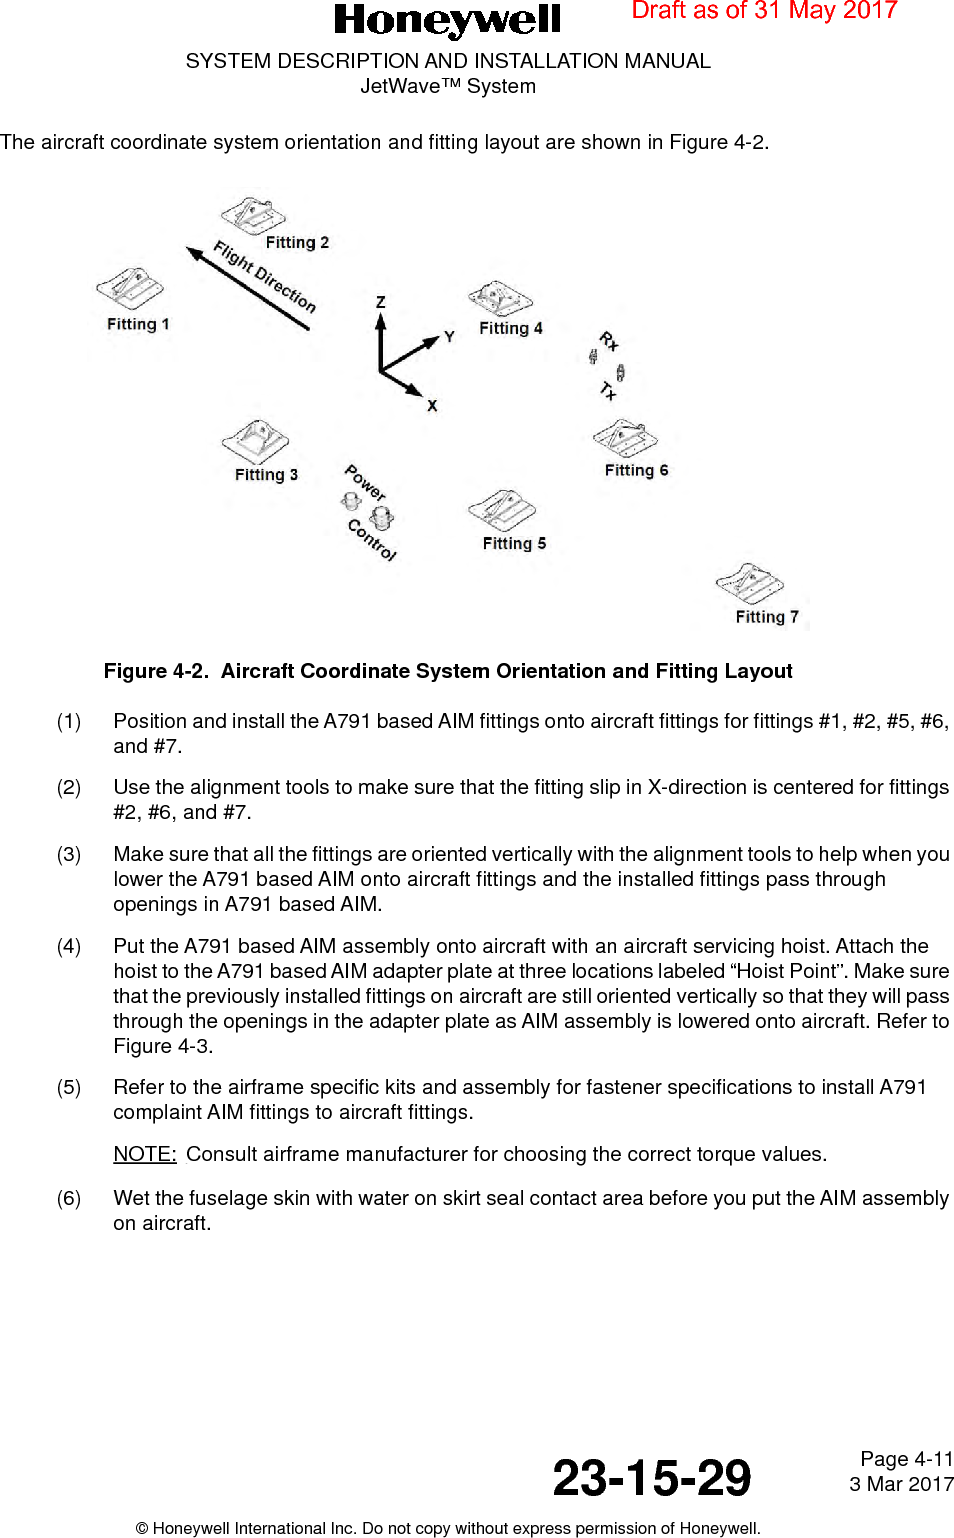 Page 4-11 3 Mar 201723-15-29SYSTEM DESCRIPTION AND INSTALLATION MANUALJetWave™ System© Honeywell International Inc. Do not copy without express permission of Honeywell.The aircraft coordinate system orientation and fitting layout are shown in Figure 4-2.Figure 4-2.  Aircraft Coordinate System Orientation and Fitting Layout (1) Position and install the A791 based AIM fittings onto aircraft fittings for fittings #1, #2, #5, #6, and #7. (2) Use the alignment tools to make sure that the fitting slip in X-direction is centered for fittings #2, #6, and #7. (3) Make sure that all the fittings are oriented vertically with the alignment tools to help when you lower the A791 based AIM onto aircraft fittings and the installed fittings pass through openings in A791 based AIM. (4) Put the A791 based AIM assembly onto aircraft with an aircraft servicing hoist. Attach the hoist to the A791 based AIM adapter plate at three locations labeled “Hoist Point”. Make sure that the previously installed fittings on aircraft are still oriented vertically so that they will pass through the openings in the adapter plate as AIM assembly is lowered onto aircraft. Refer to Figure 4-3.(5) Refer to the airframe specific kits and assembly for fastener specifications to install A791 complaint AIM fittings to aircraft fittings. NOTE: Consult airframe manufacturer for choosing the correct torque values. (6) Wet the fuselage skin with water on skirt seal contact area before you put the AIM assembly on aircraft.Draft as of 31 May 2017